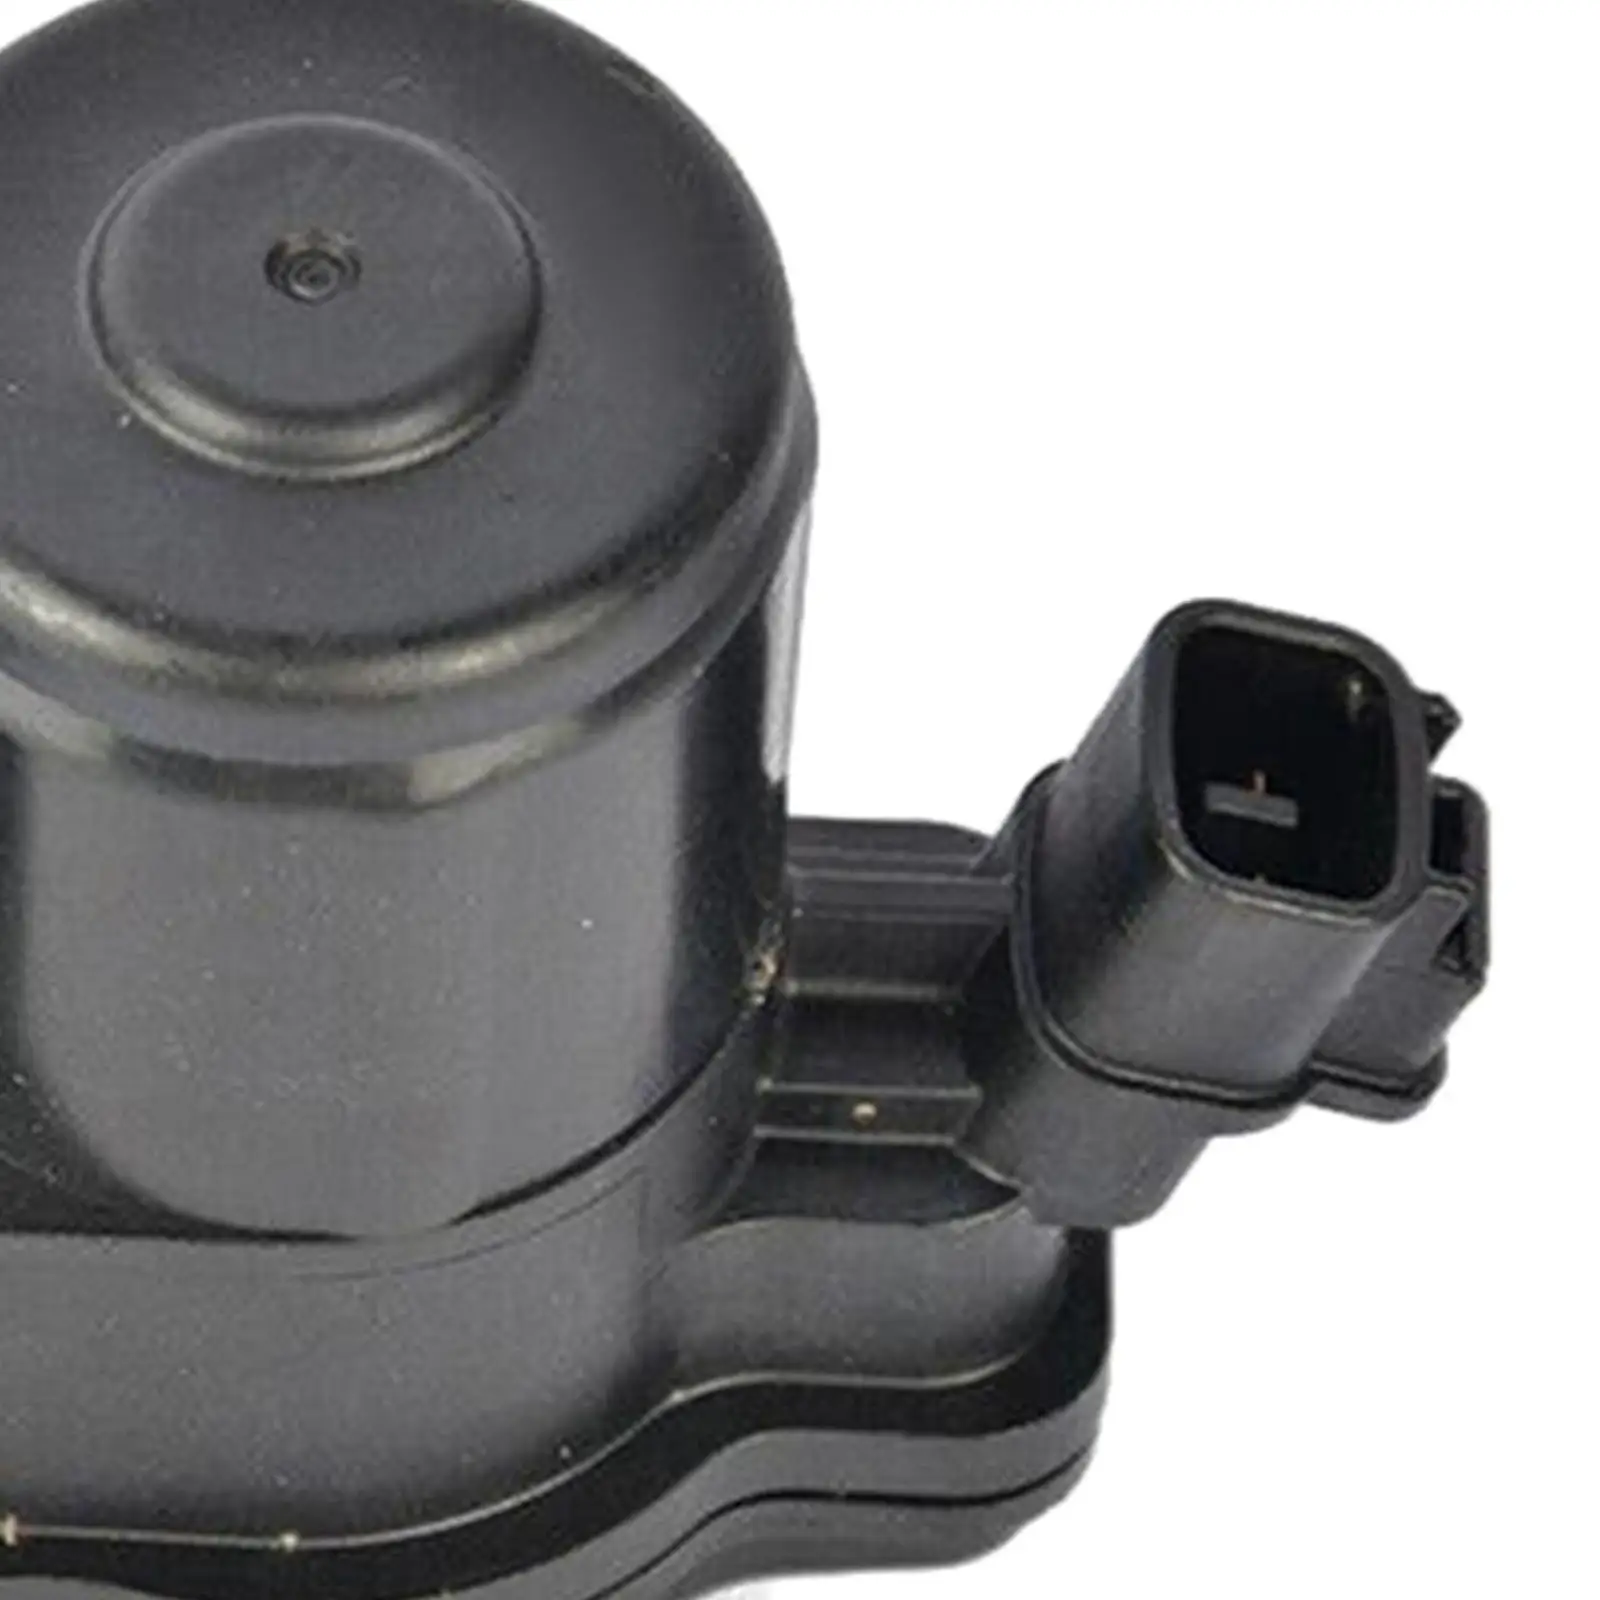 Parking Brake Actuator Assembly 46310-33010 for Toyota for sienna for camry